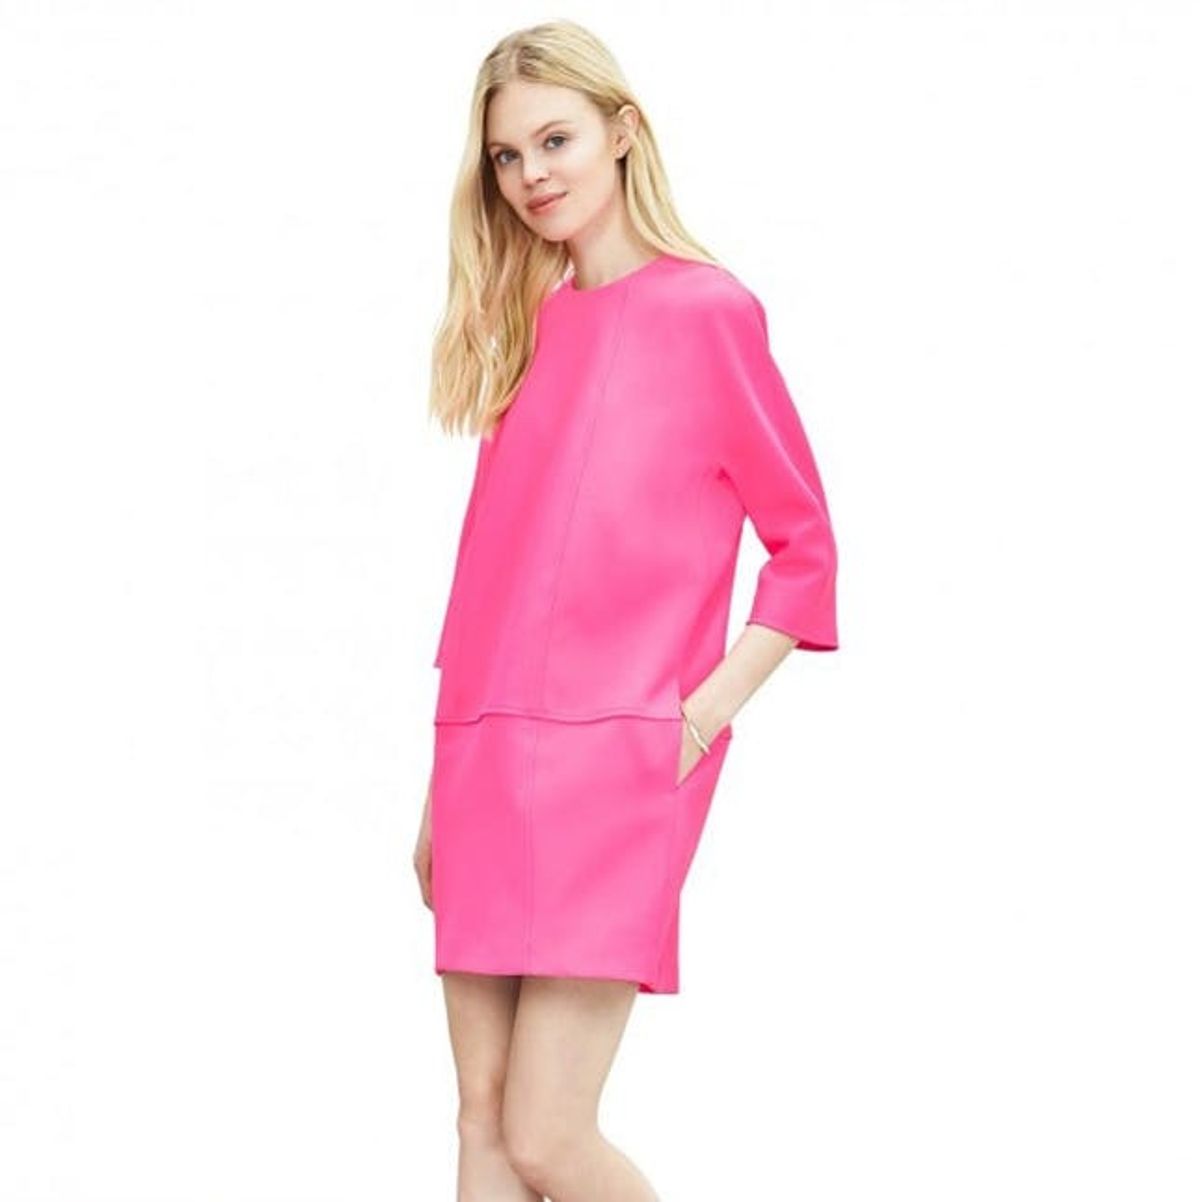 13 Comfy Dresses You’ll Want to Wear on Thanksgiving (and Every Day After)